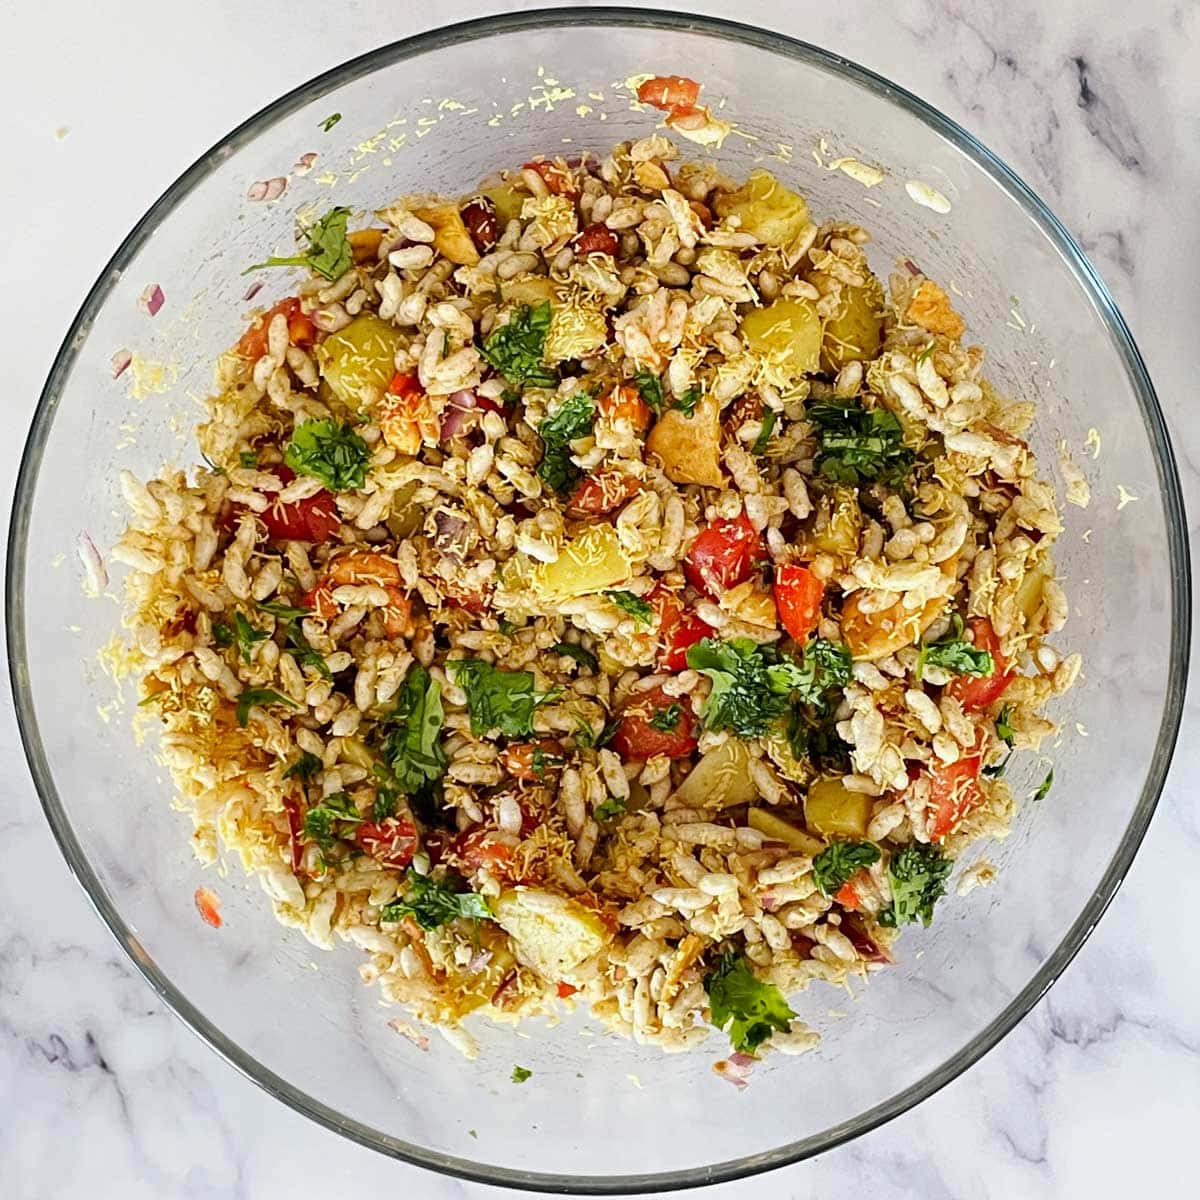 Bhel mix in a glass mixing bowl.